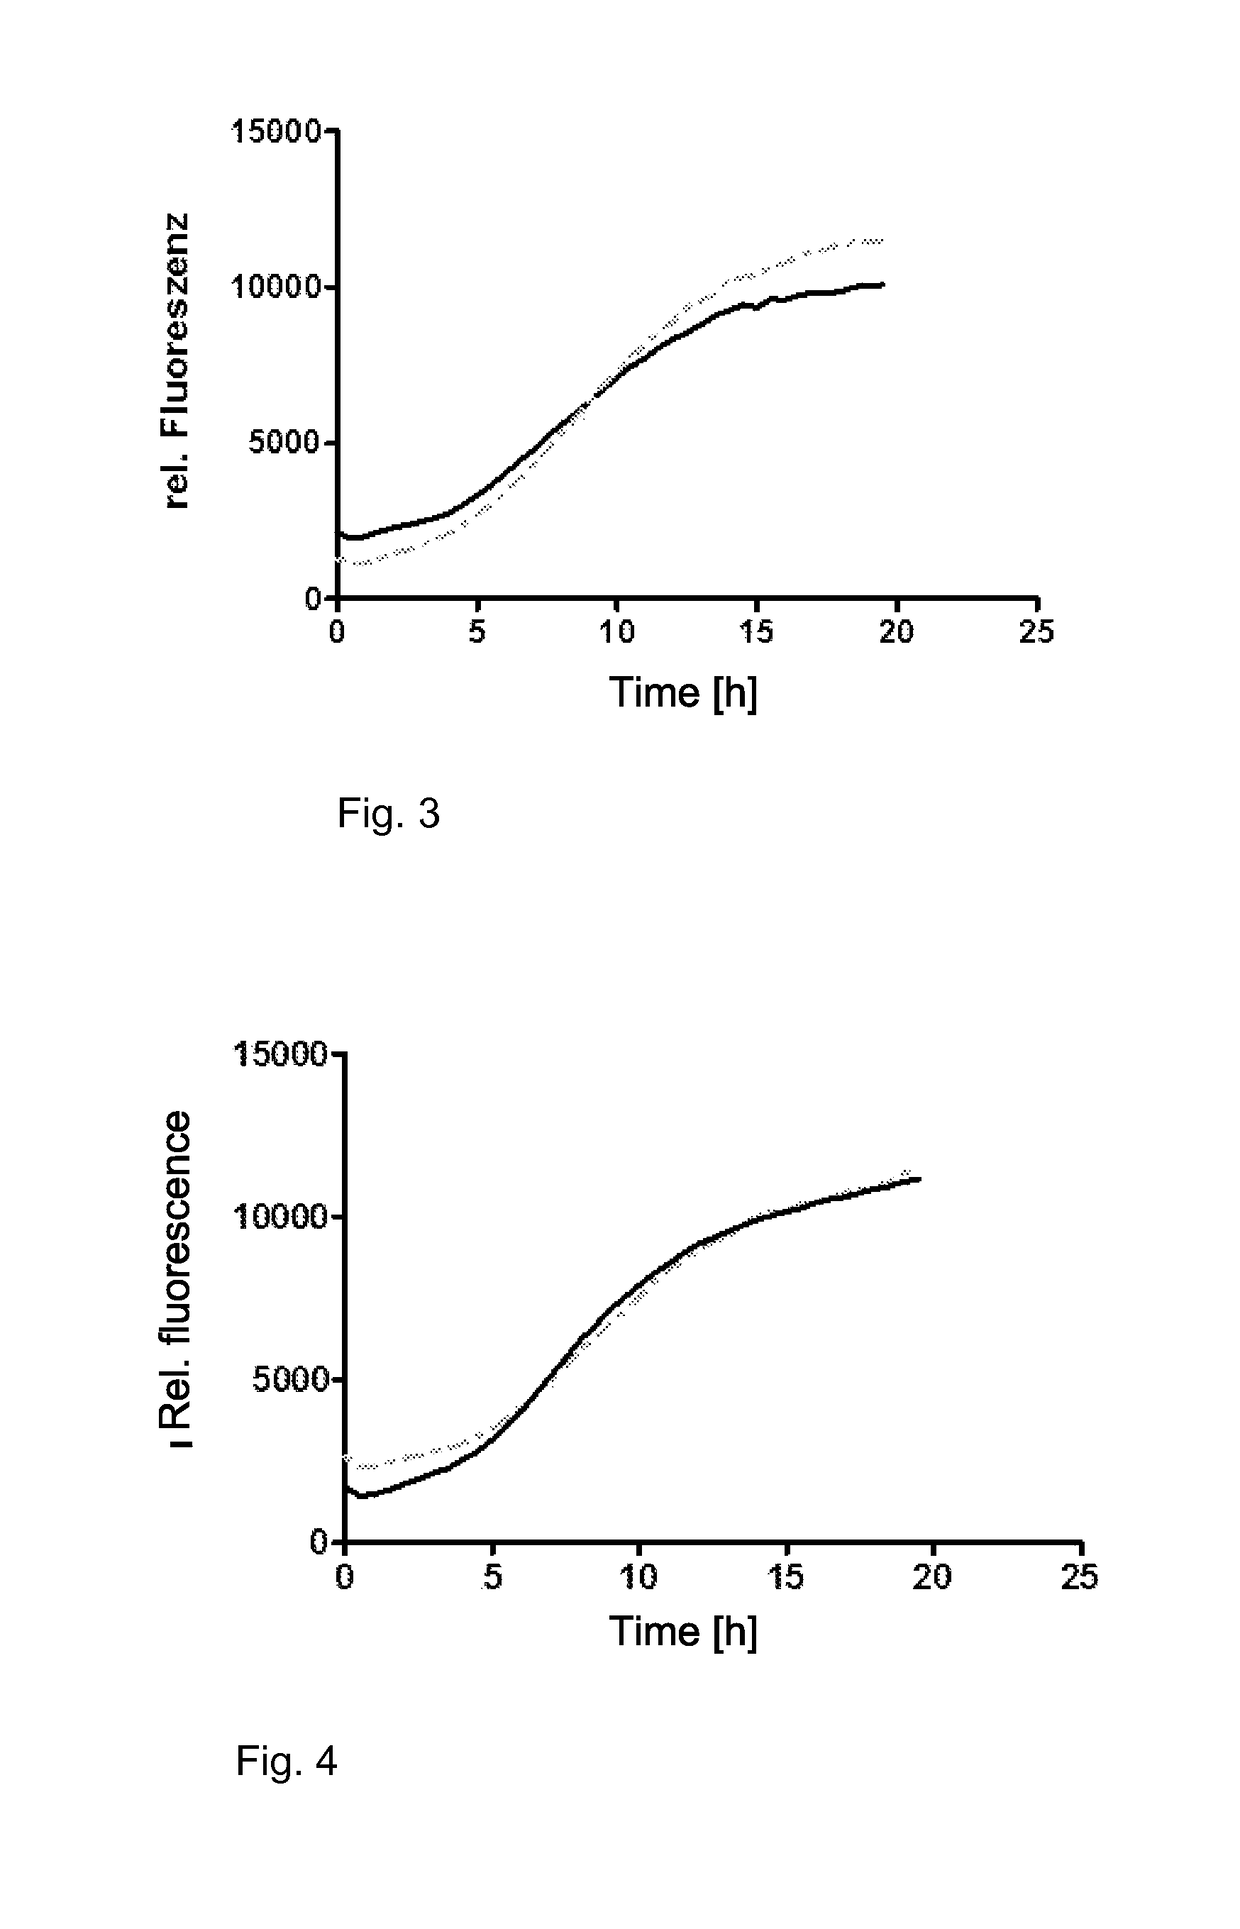 Method for treating blood, blood products and organs